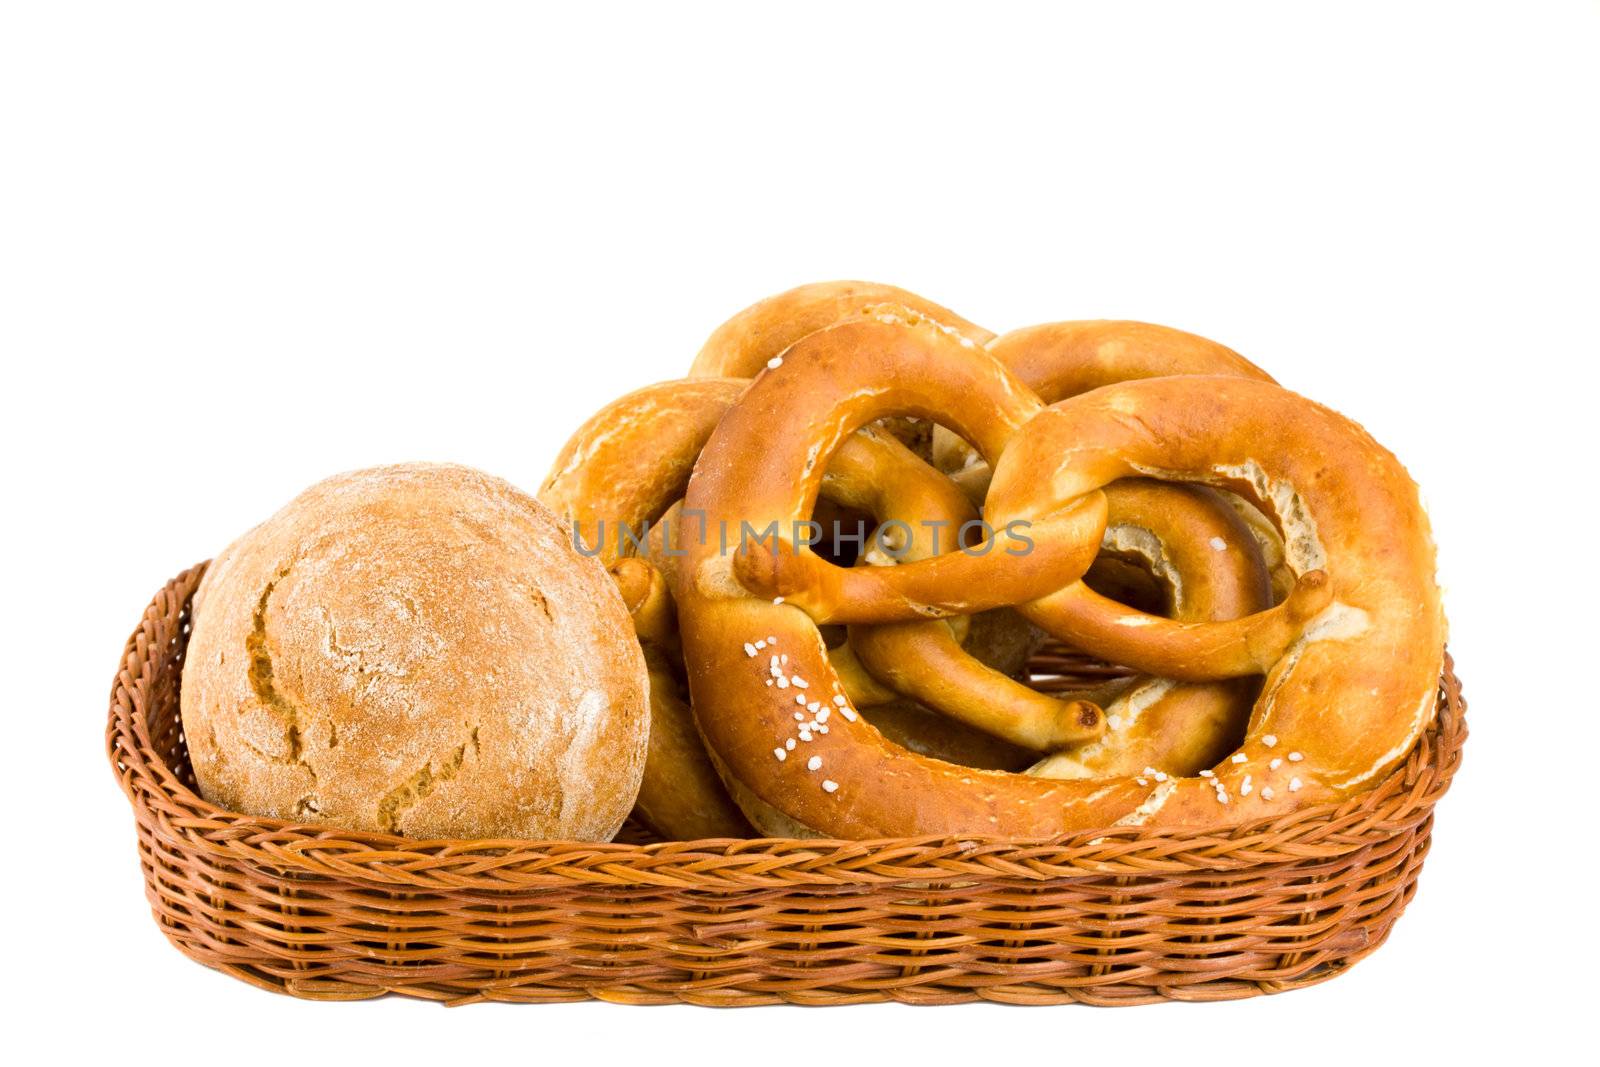 bread basket with pretzel isolated on white